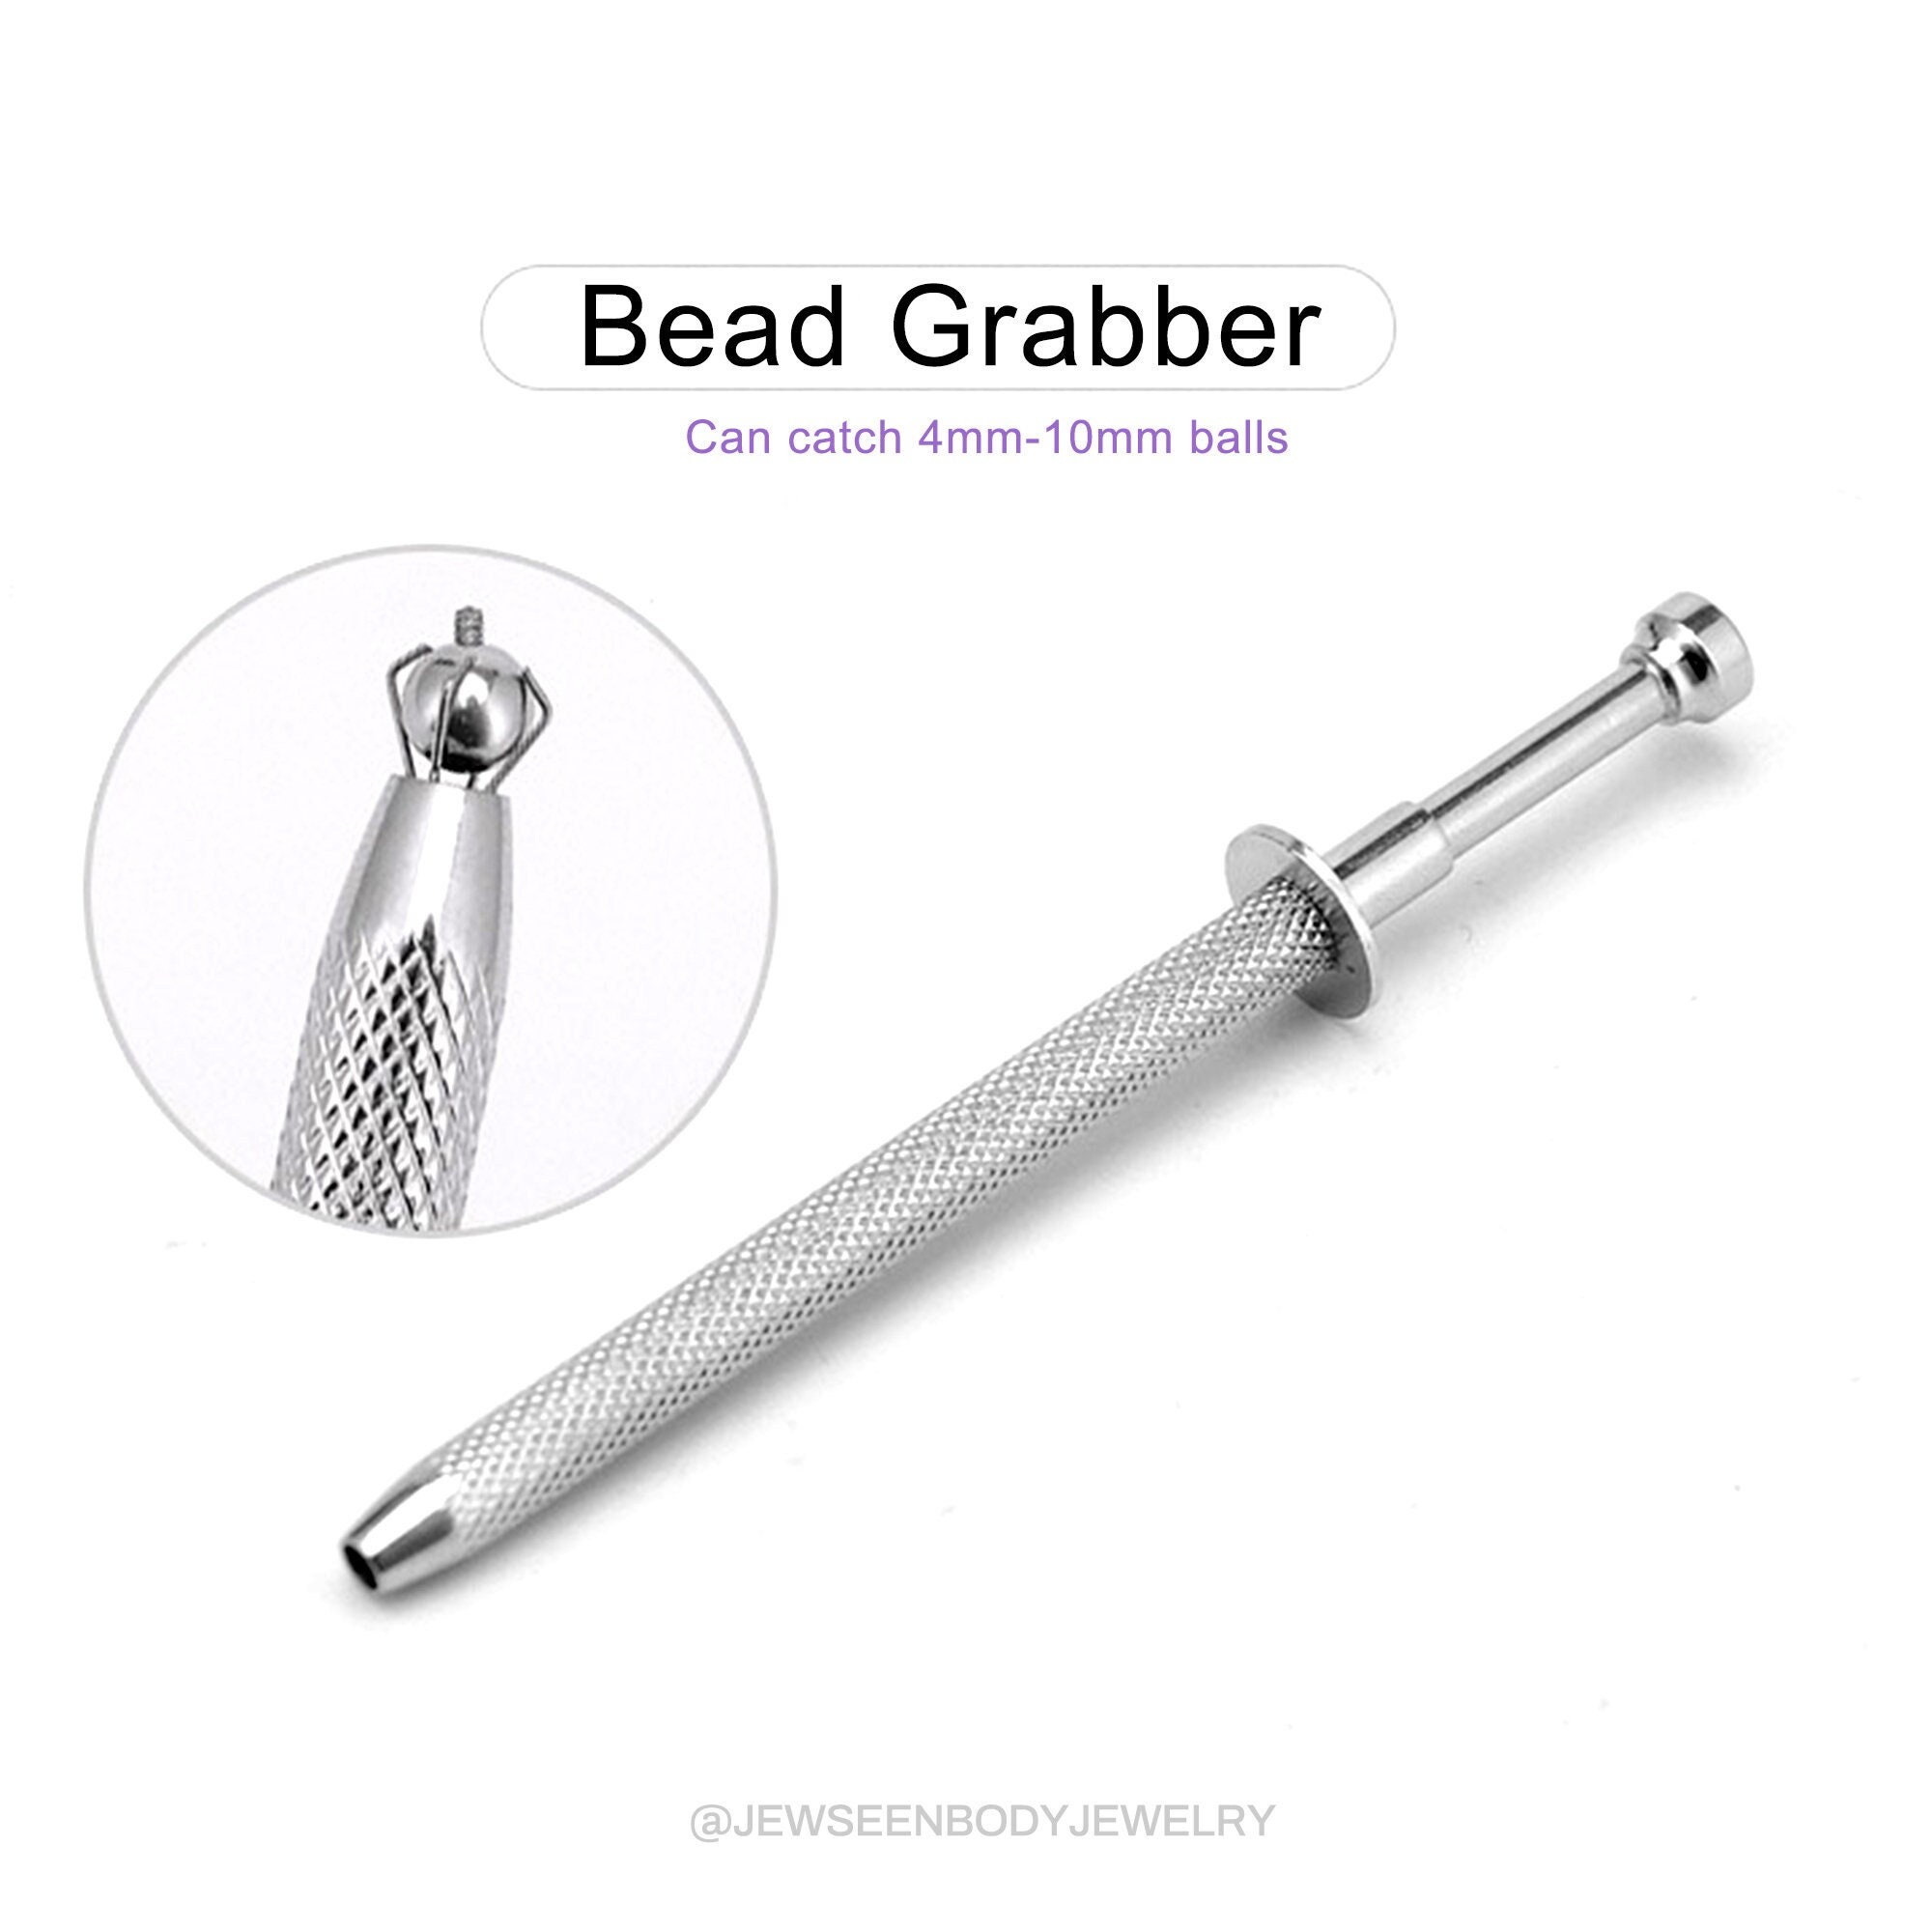 Push-in Syringe Style Quad Prong Small Bead Holder Piercing Tool, Bead  Grabber, Body Piercing Tool, Pick up Tool, Screw Holder -  Norway